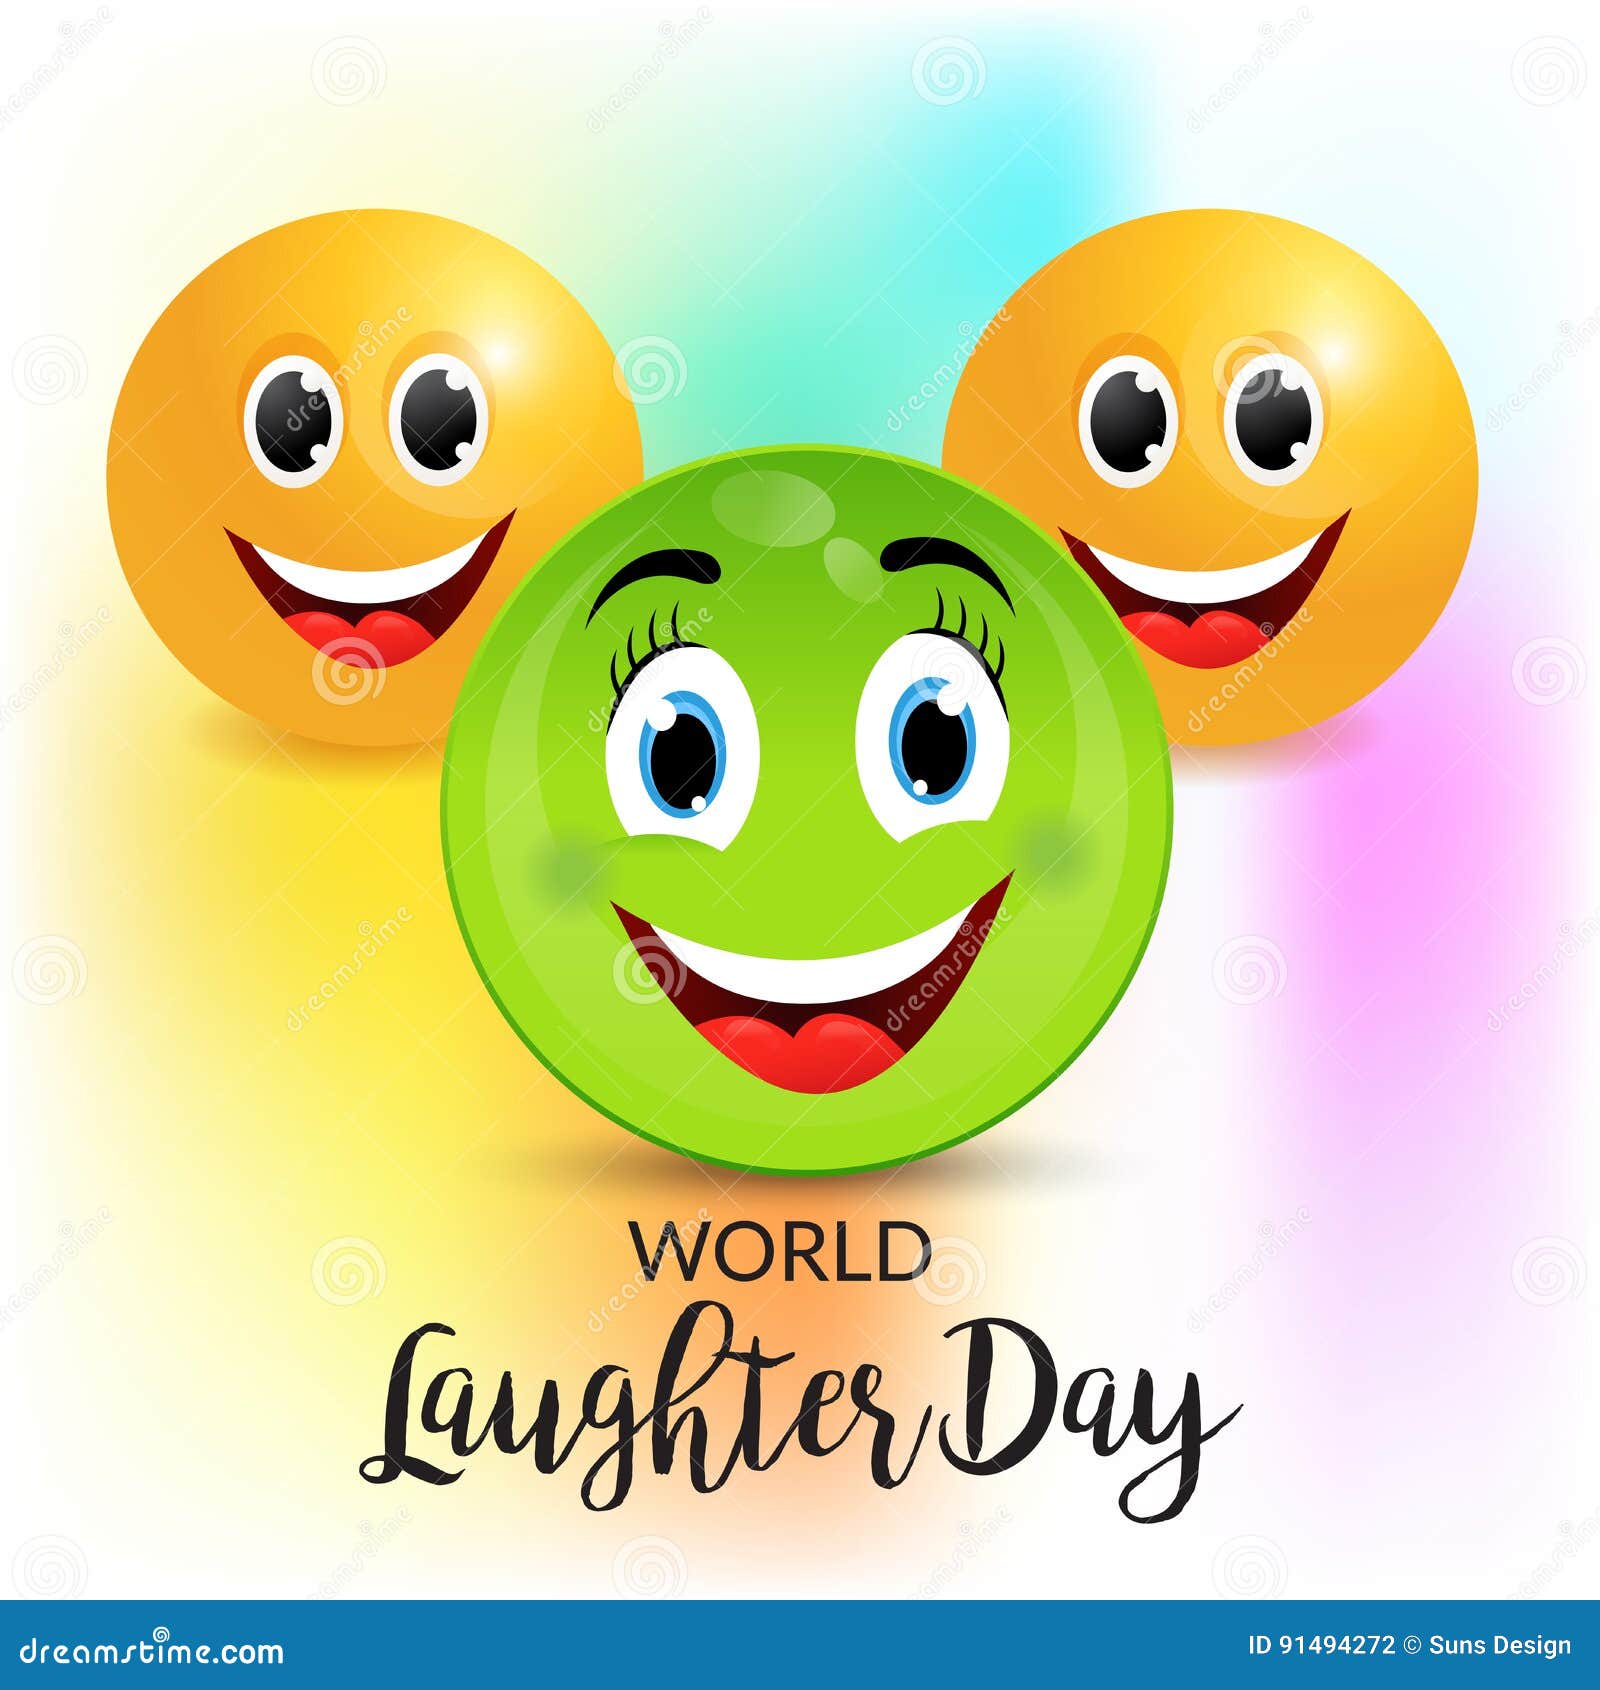 world laughter day.